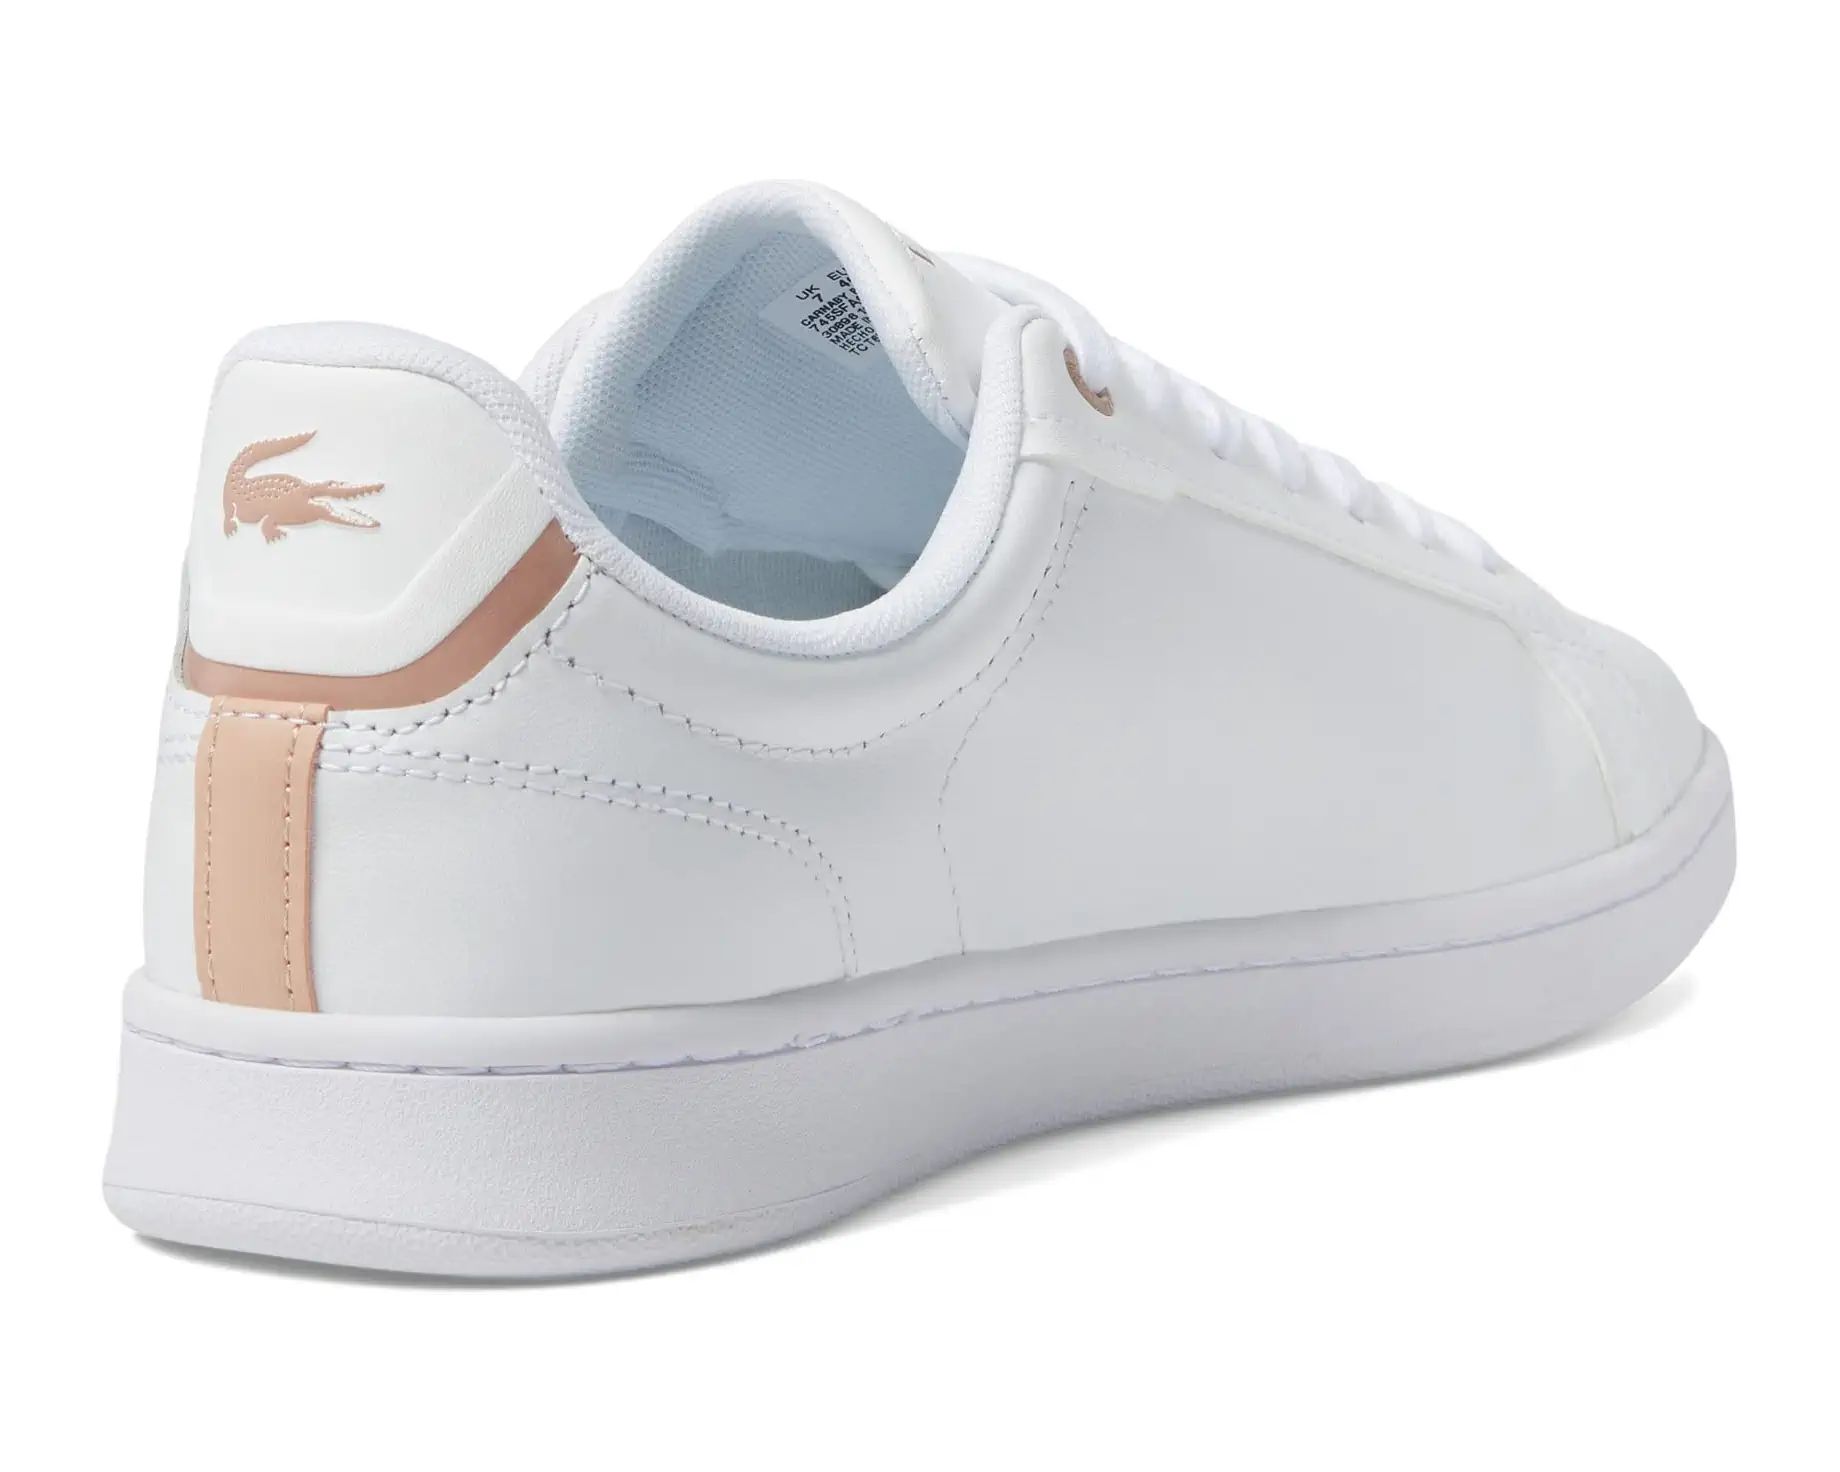 Carnaby Pro Bl 23 1 | Zappos